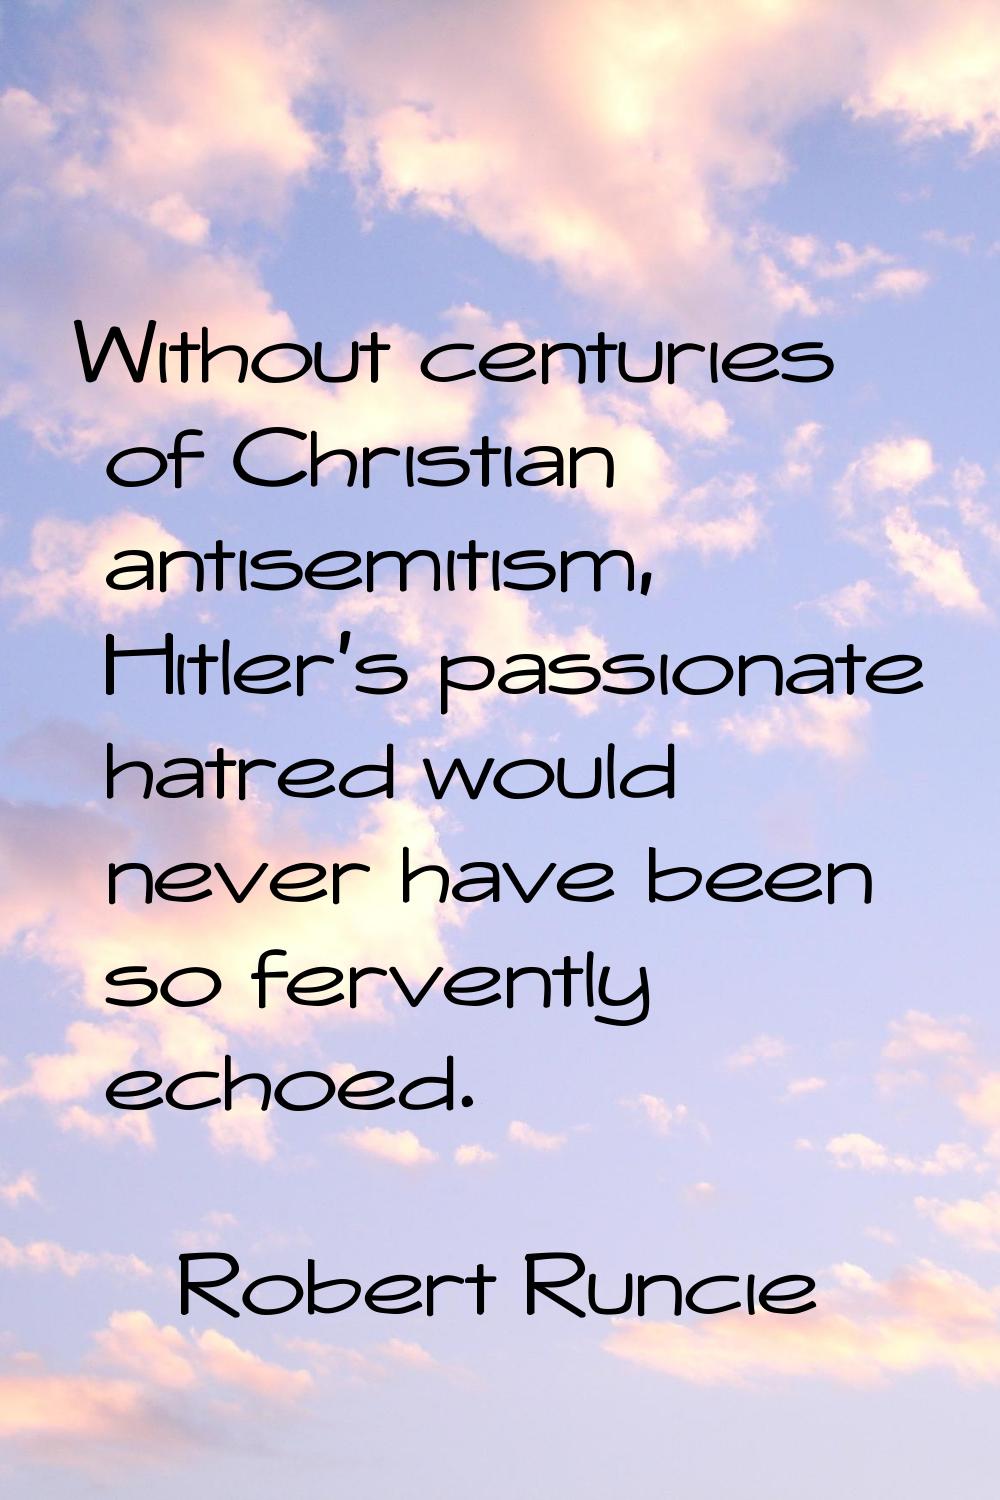 Without centuries of Christian antisemitism, Hitler's passionate hatred would never have been so fe